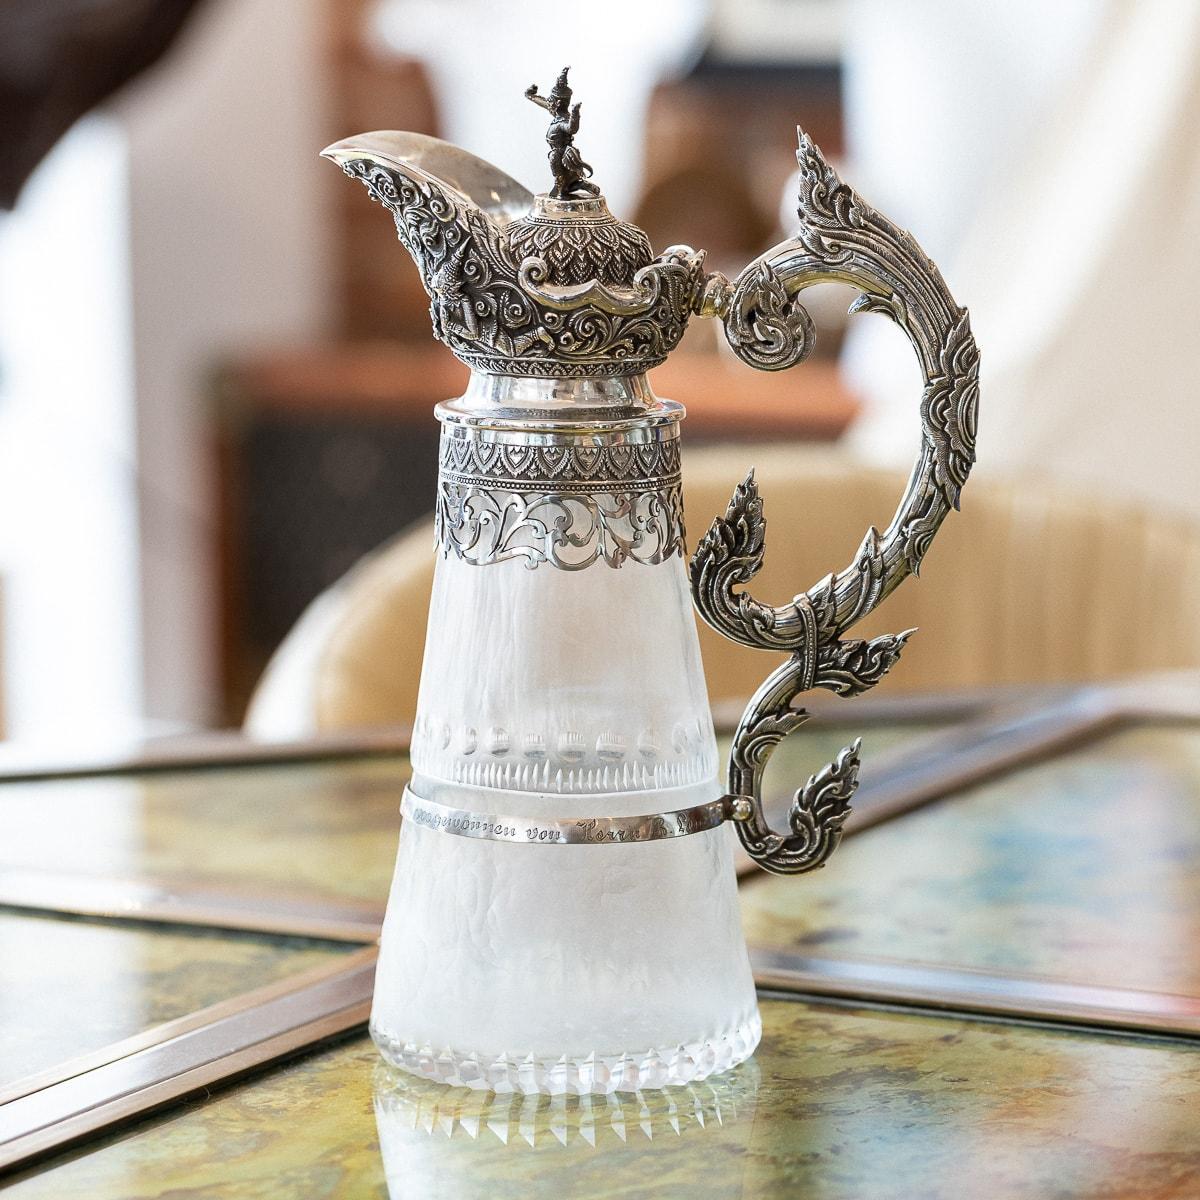 Antique late 19th Century Exceptional Burmese, (Myanmar) solid silver mounted on frosted glass wine jug, the silver mounts repousse' decorated in high relief depicting characters from the Burmese mythology, large reclining detailed deity figures set